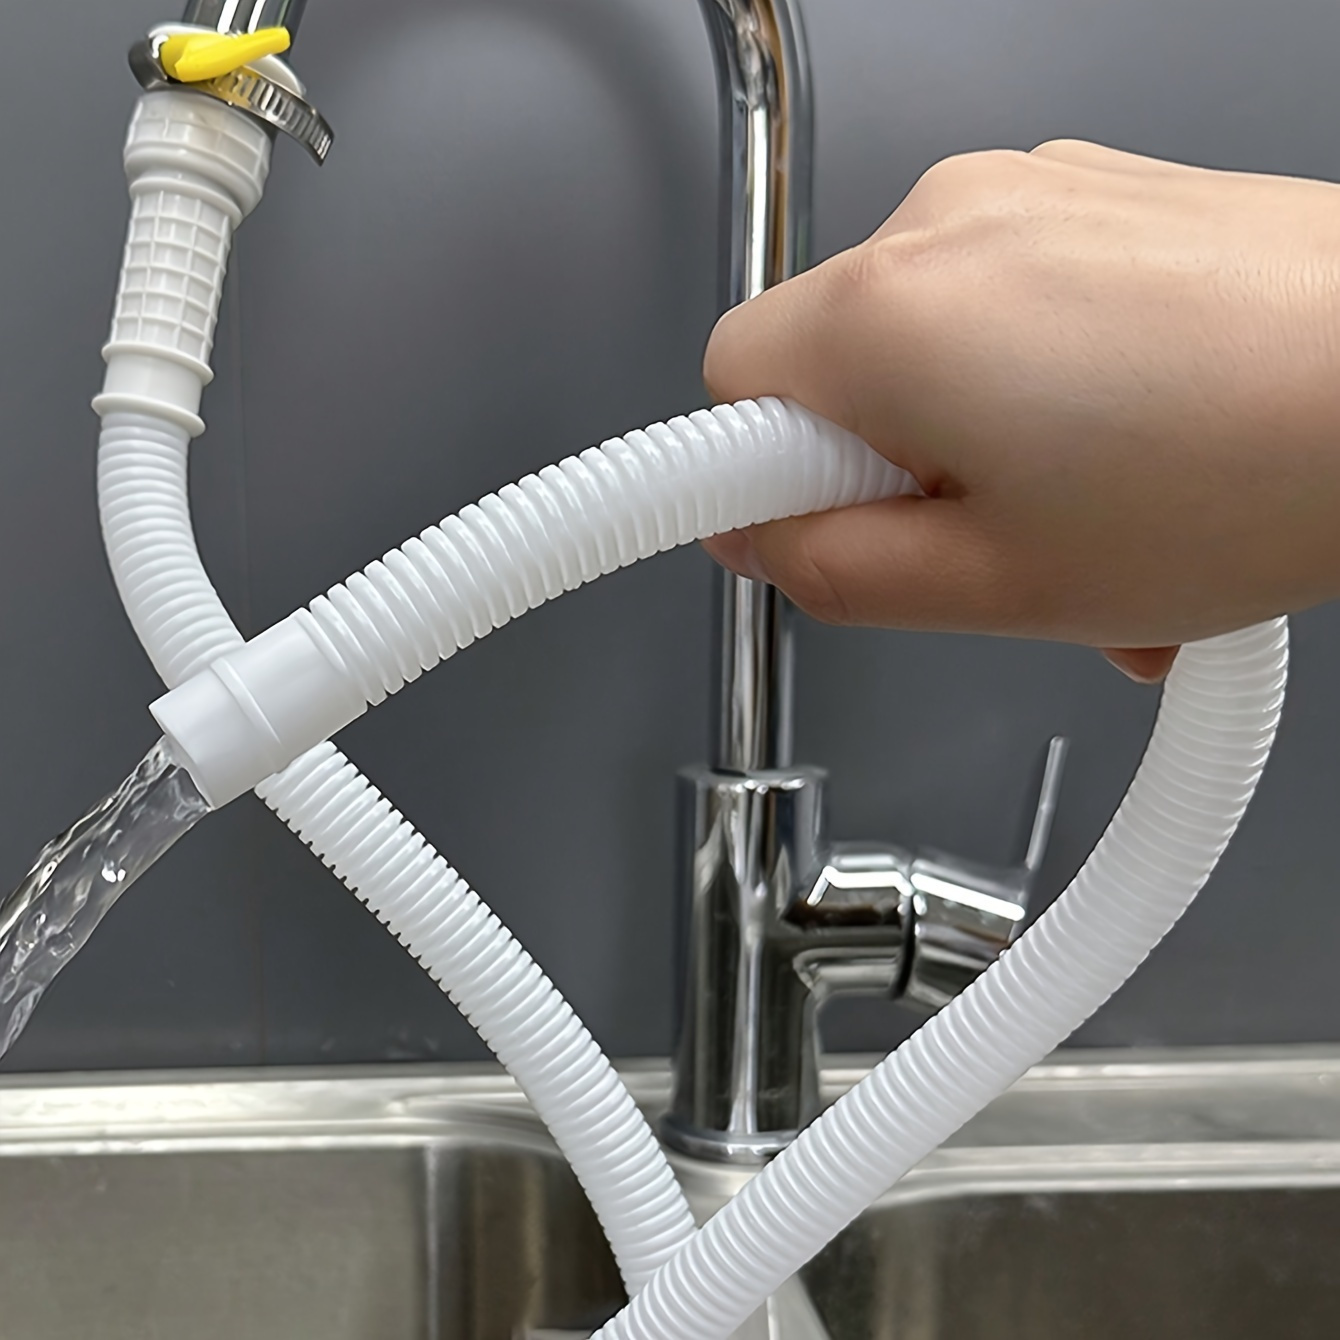 

1pc, 1.5m Plastic Flexible Faucet Extension Hose, White Washing Machine Water Pipe For Indoor Home Kitchen Hand Wash Basin For 1.5cm-2.5cm Pipes, Household Utility